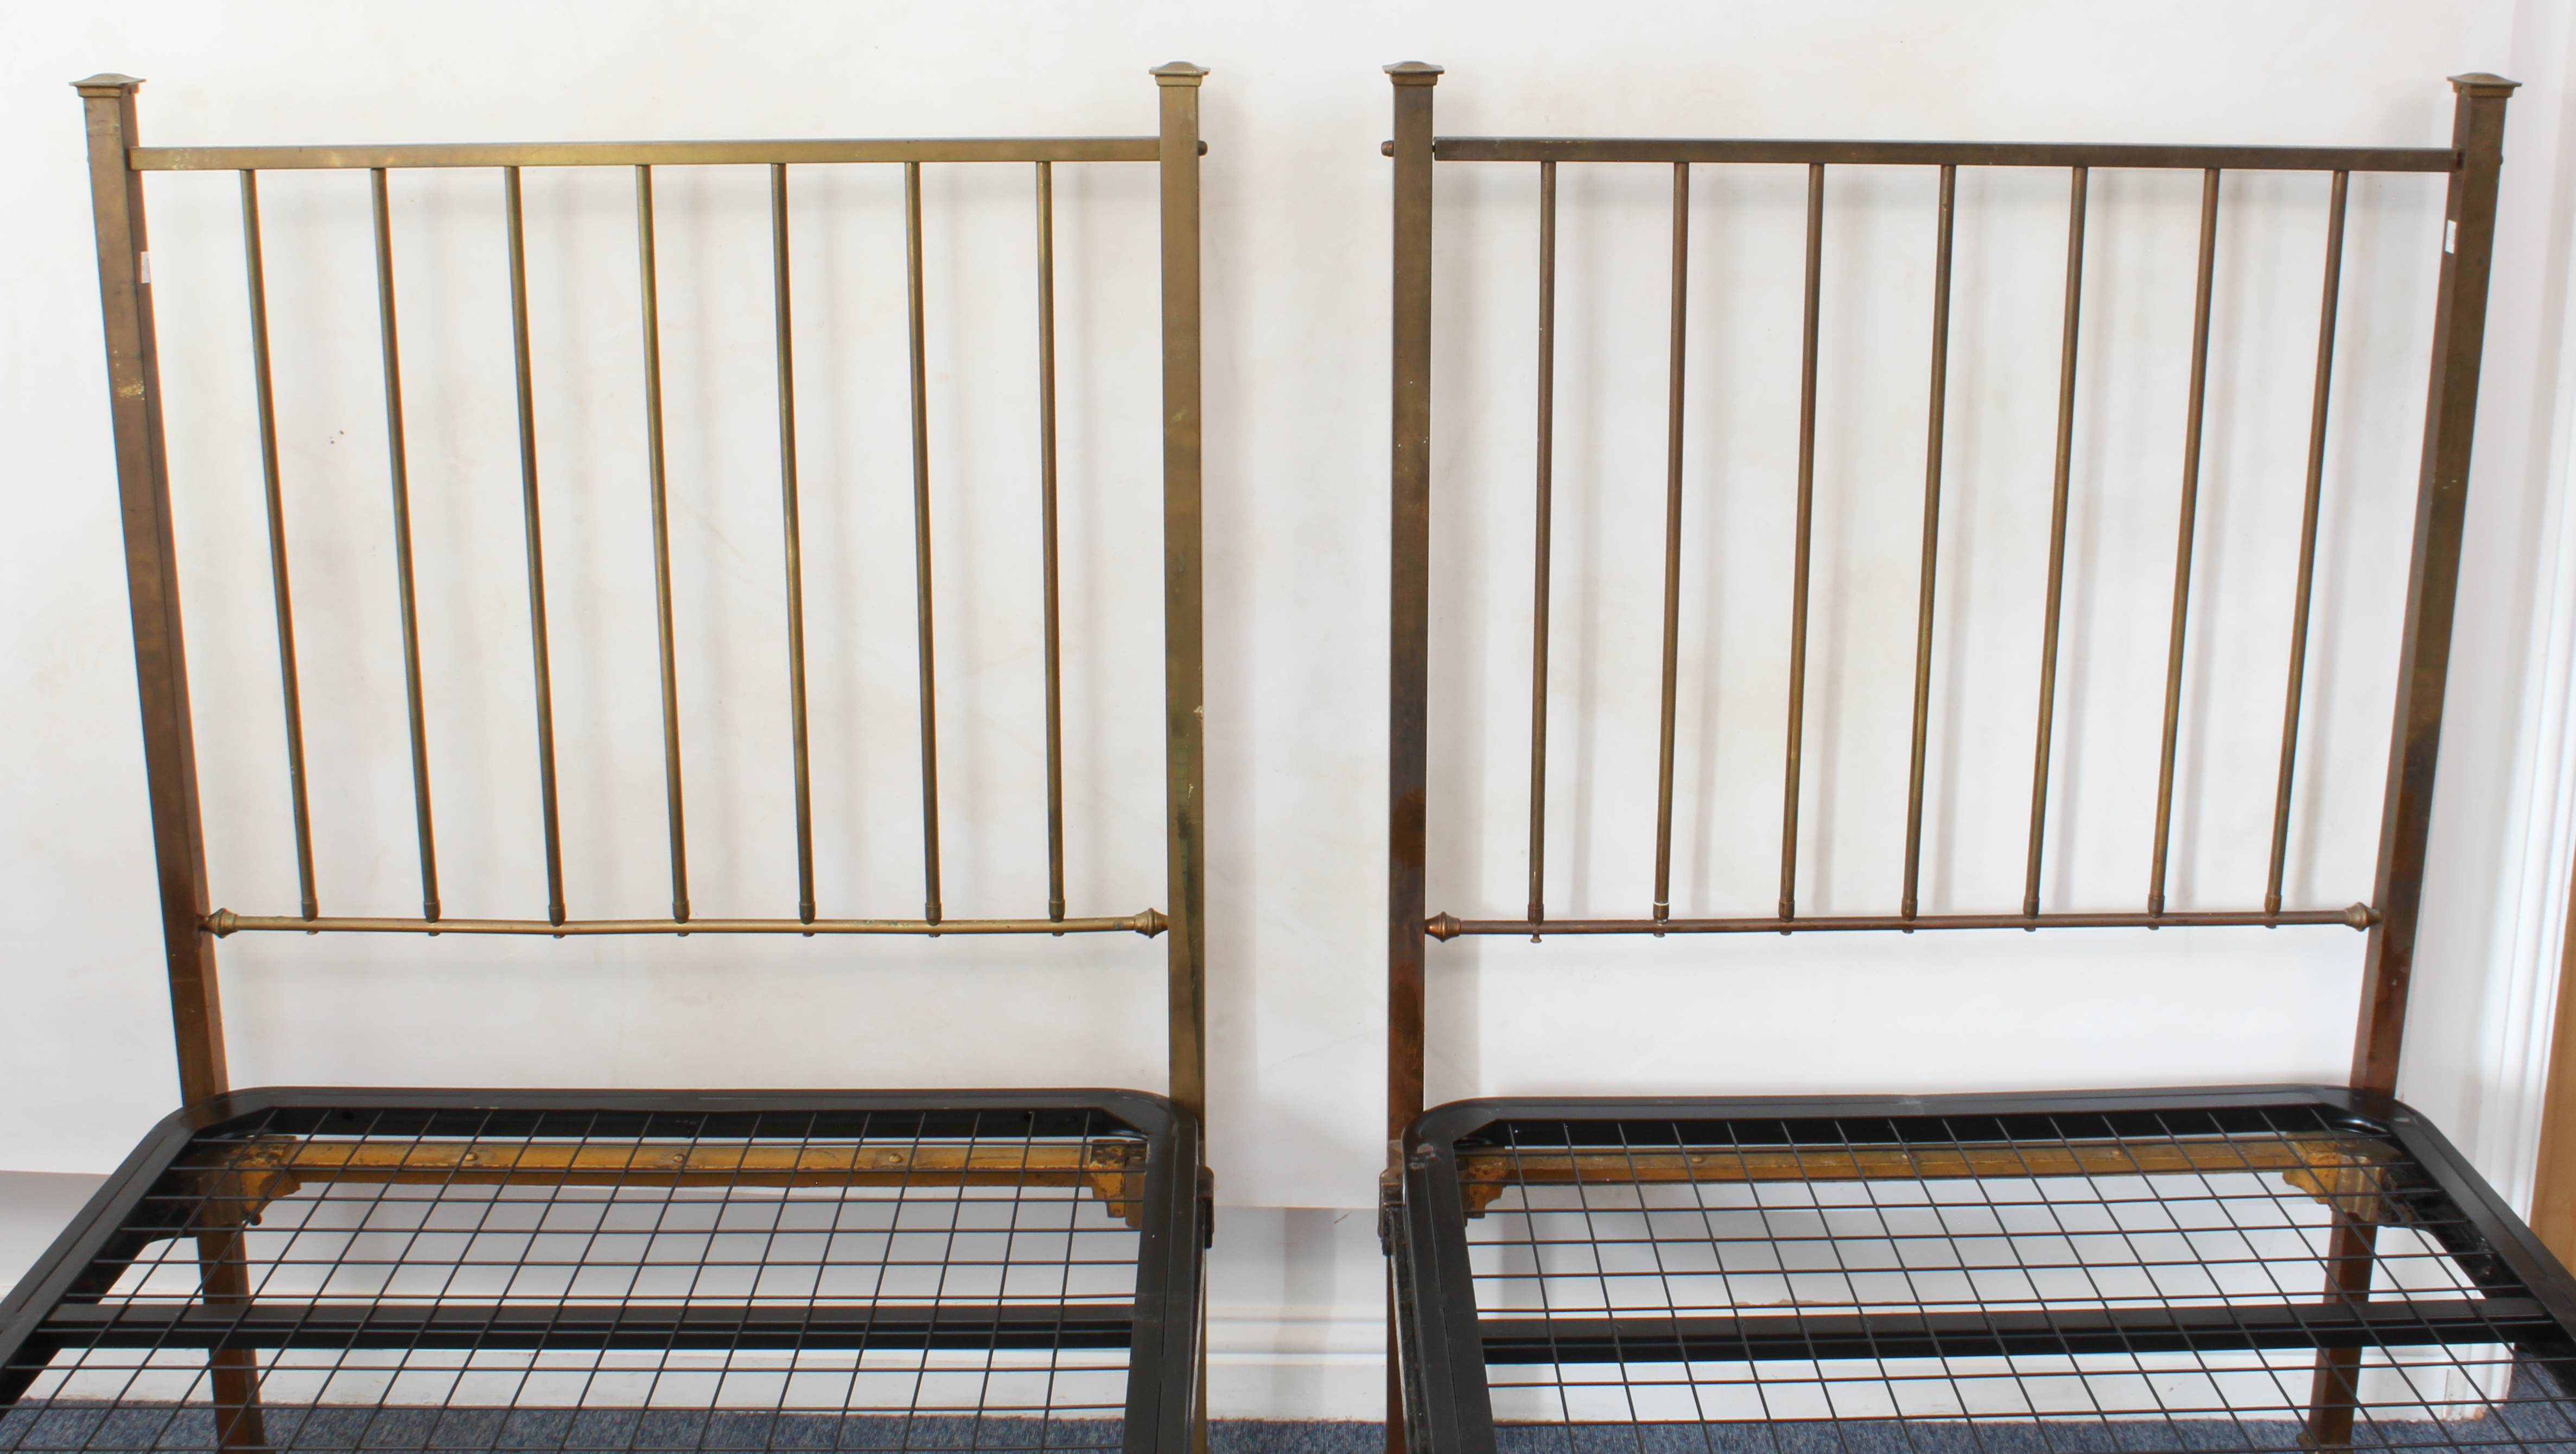 A pair of brass single beds by Heal & Sons (Heals) - 1920s-30s, the head and foot boards with square - Bild 4 aus 7